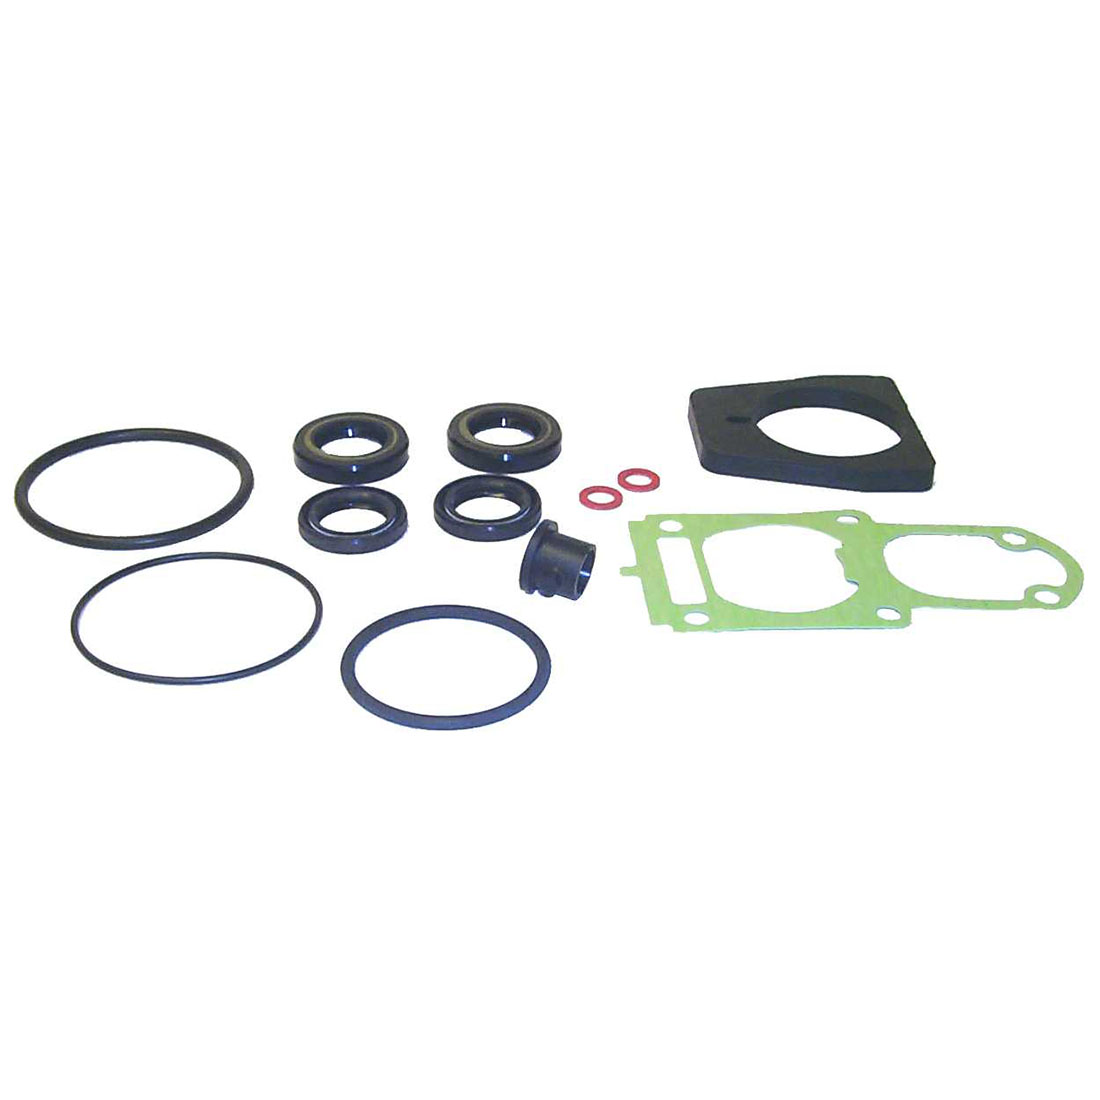 Lower Unit Seal Kit For Yamaha 20, 25 HP 1996 & Up Replaces 6L2-W0001-C3-00